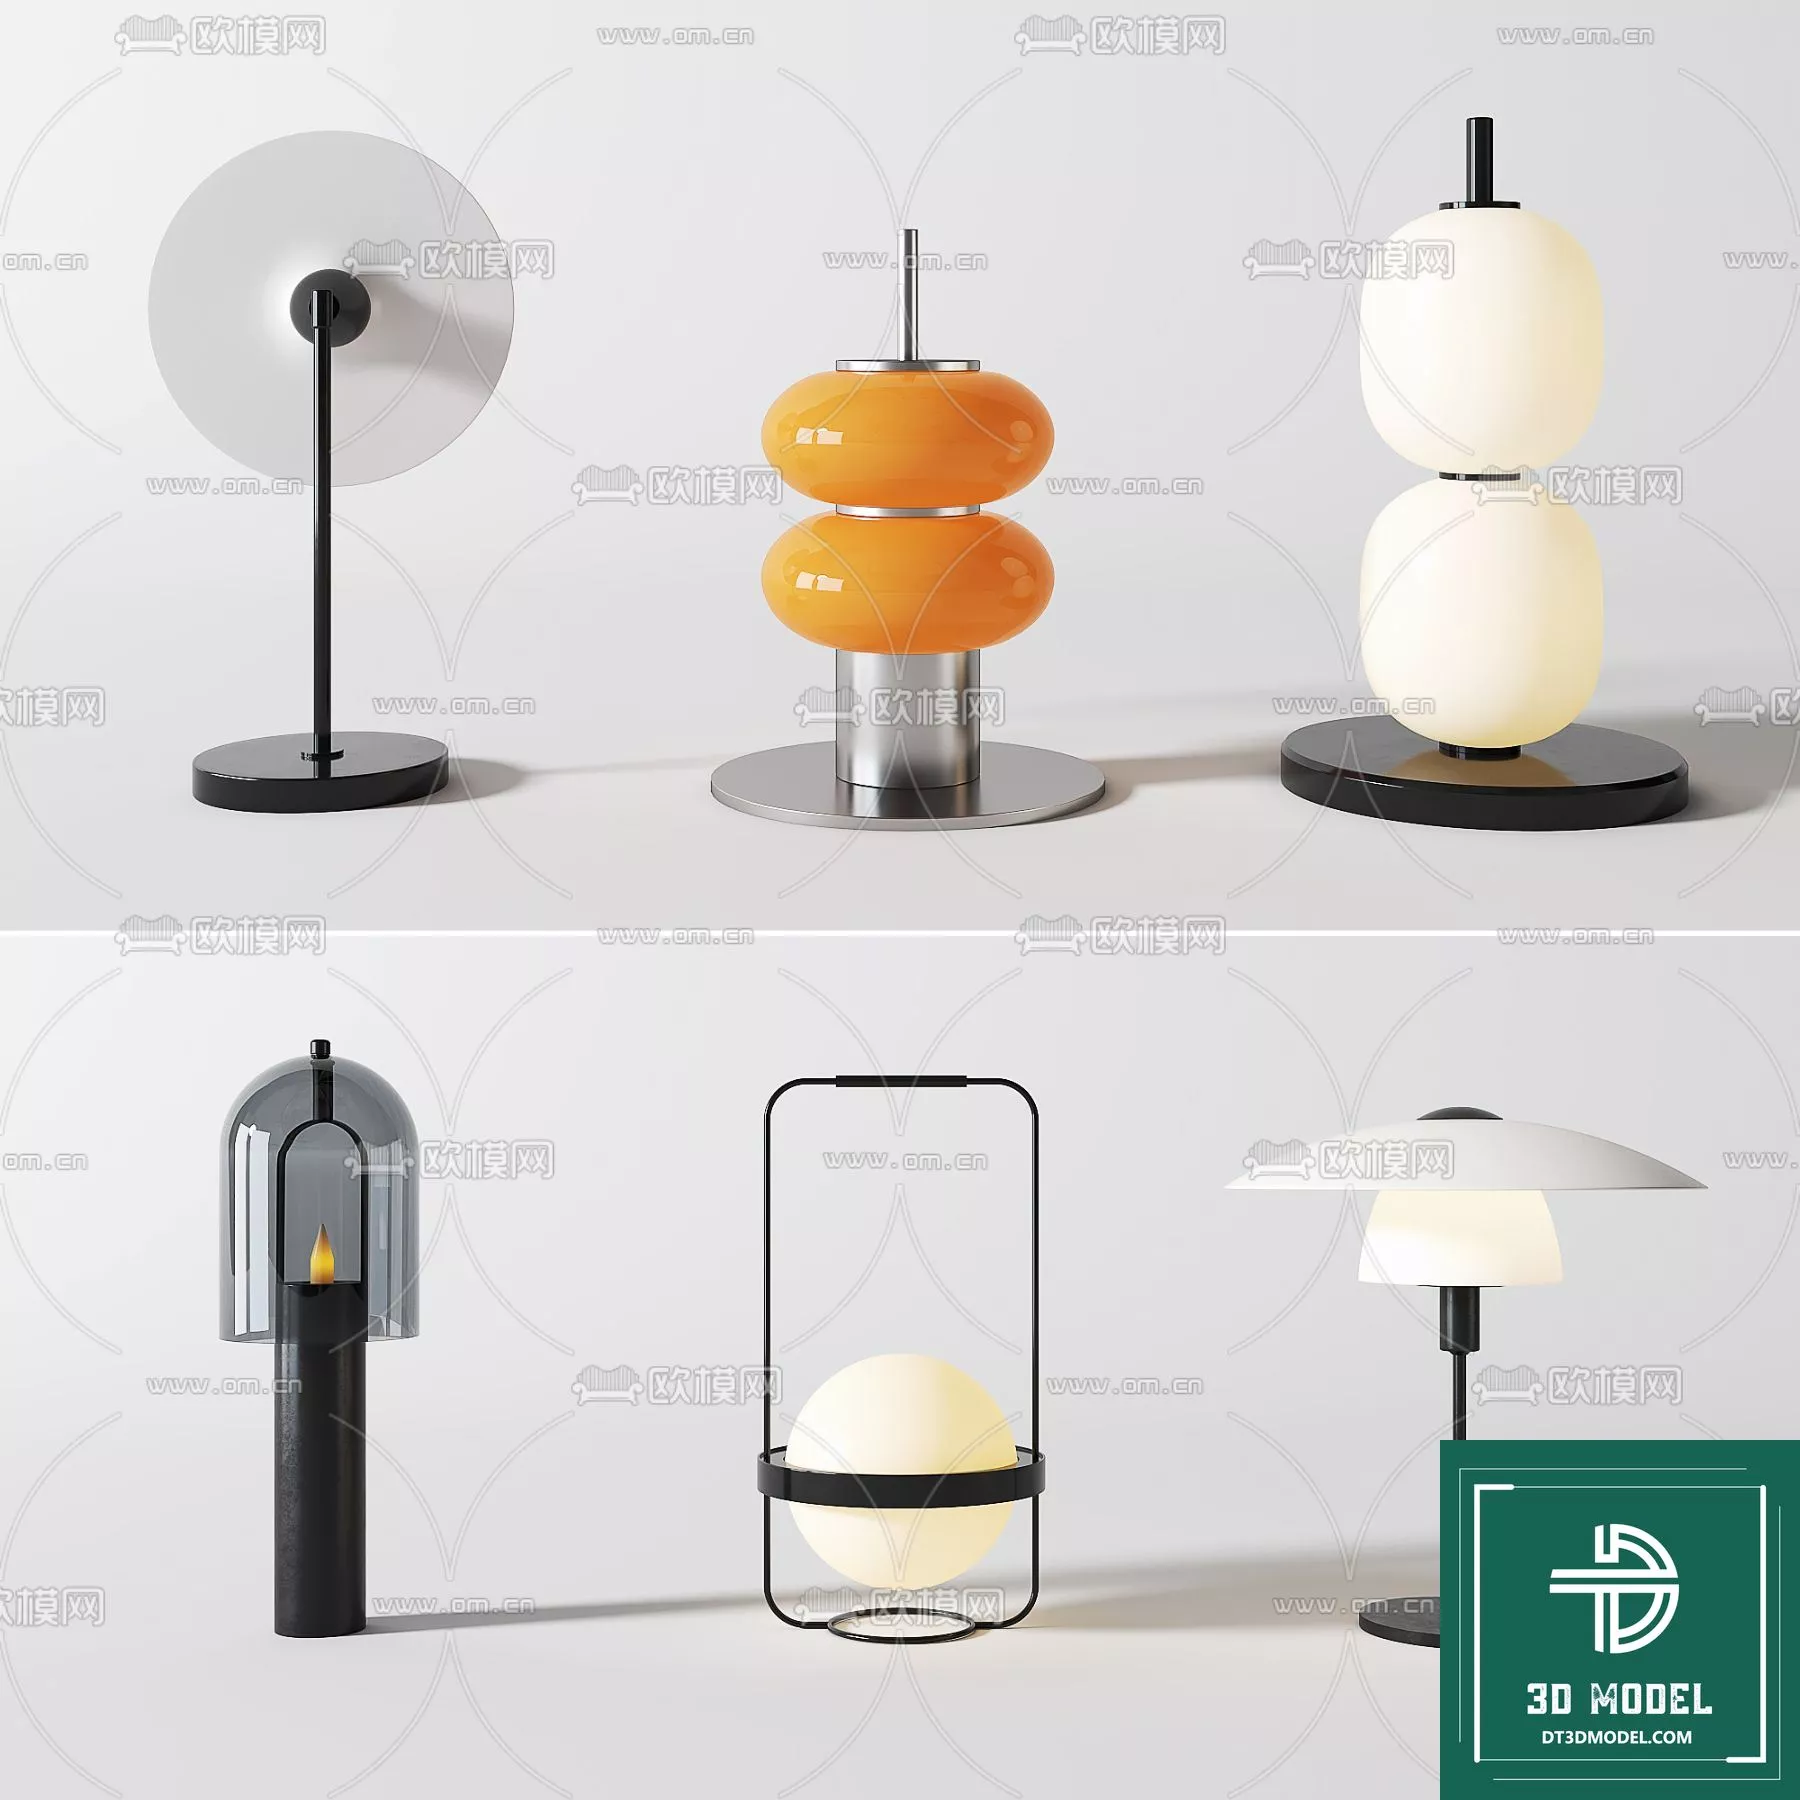 MODERN TABLE LAMP - SKETCHUP 3D MODEL - VRAY OR ENSCAPE - ID14501